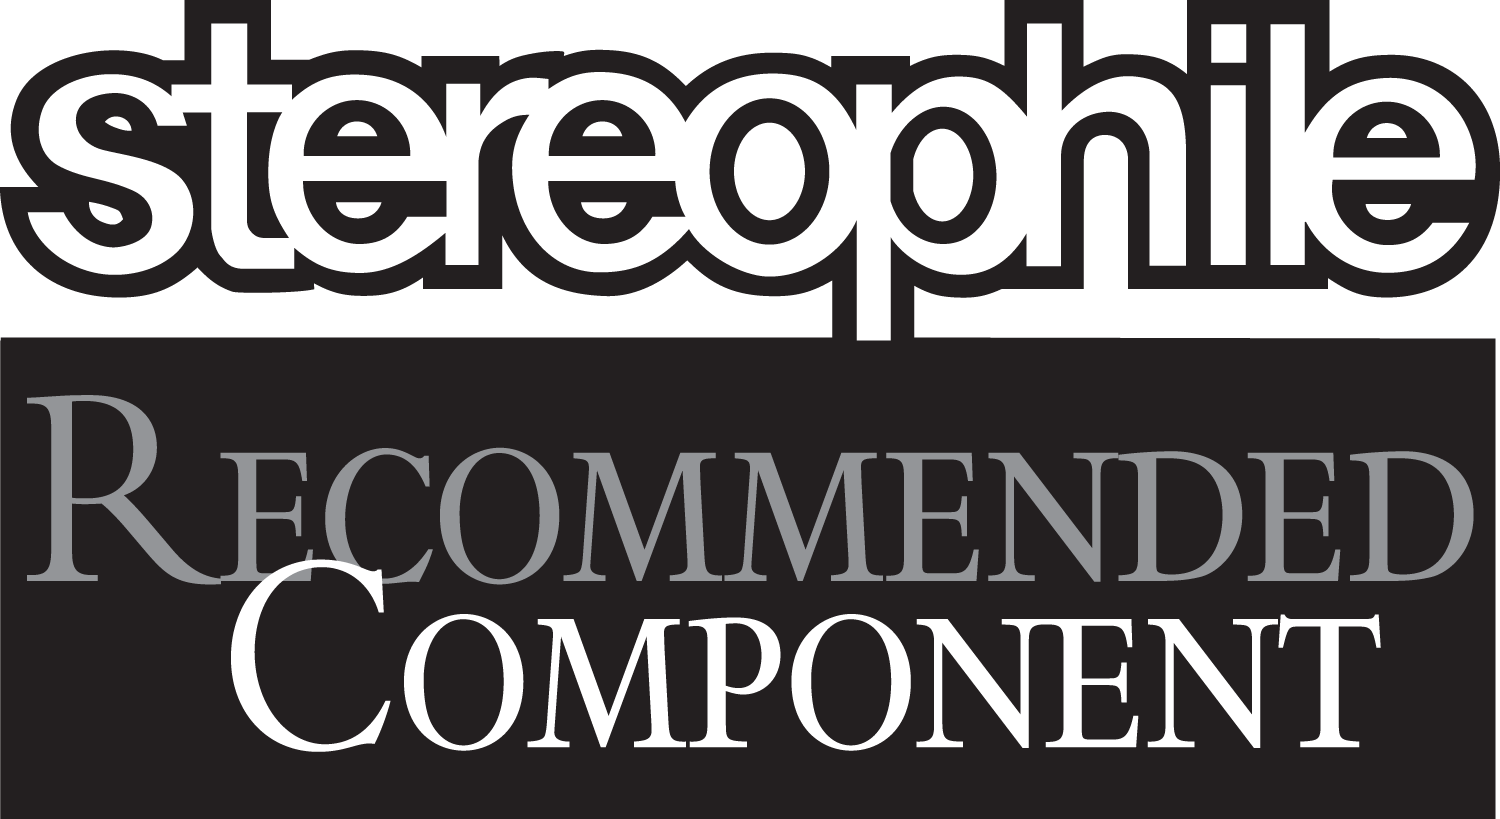 Recommended Component 2012, 2013, 2014